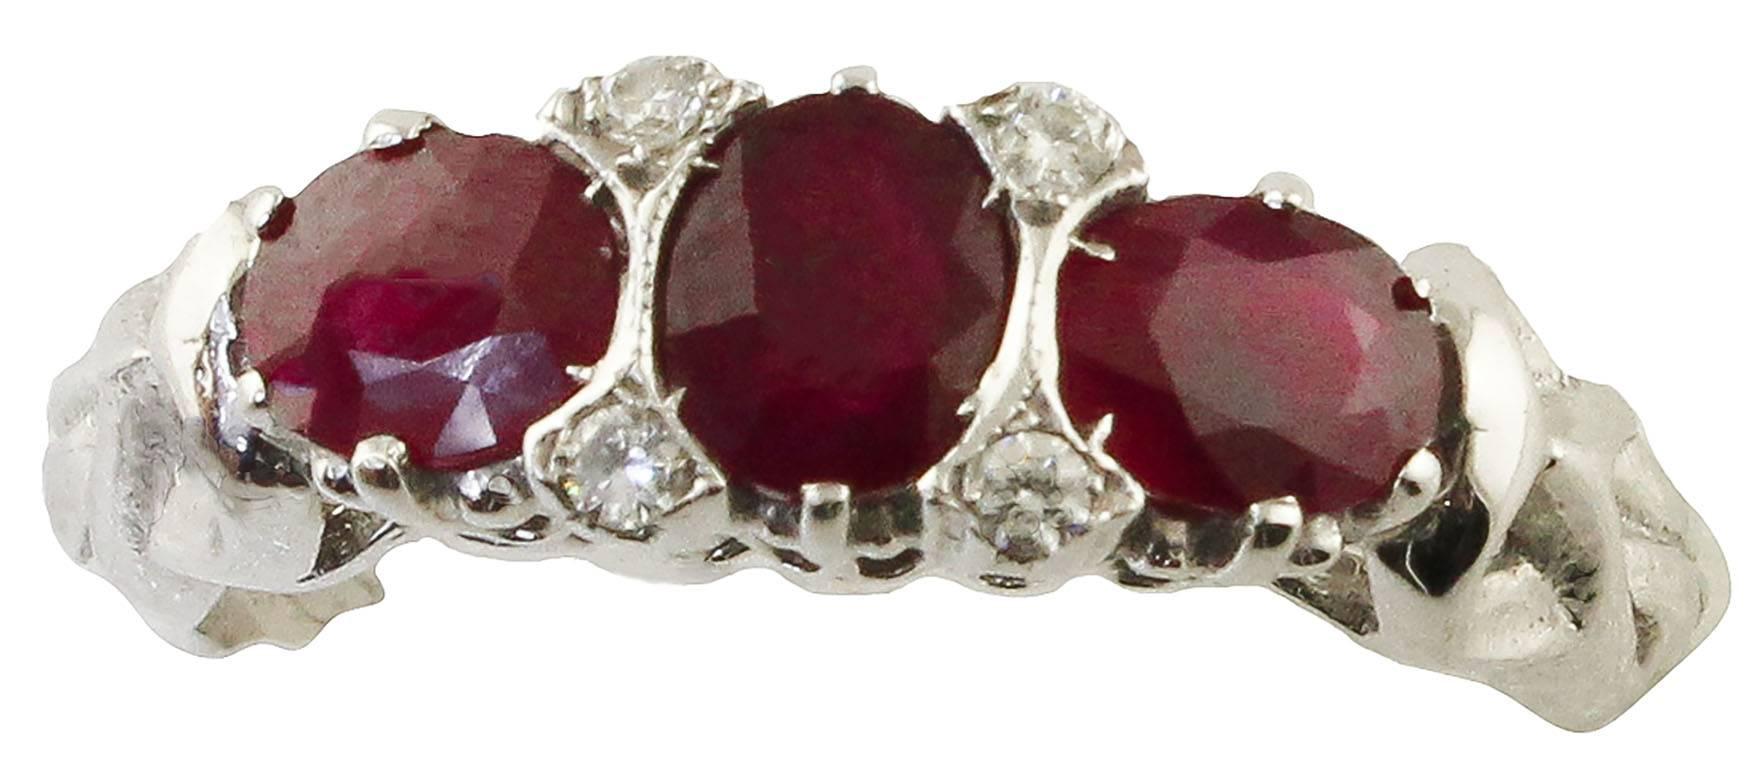 Fabulous 18 kt white gold three-stone ring with three rubies, surrounded by white diamonds that illuminate this wonderful jewel. 
Diamonds ct 0.07
Rubies 1.87 ct
Total weight g 3.70 g
Italian size 14
French Size 54
Usa Size 6.84
R.F + guuh